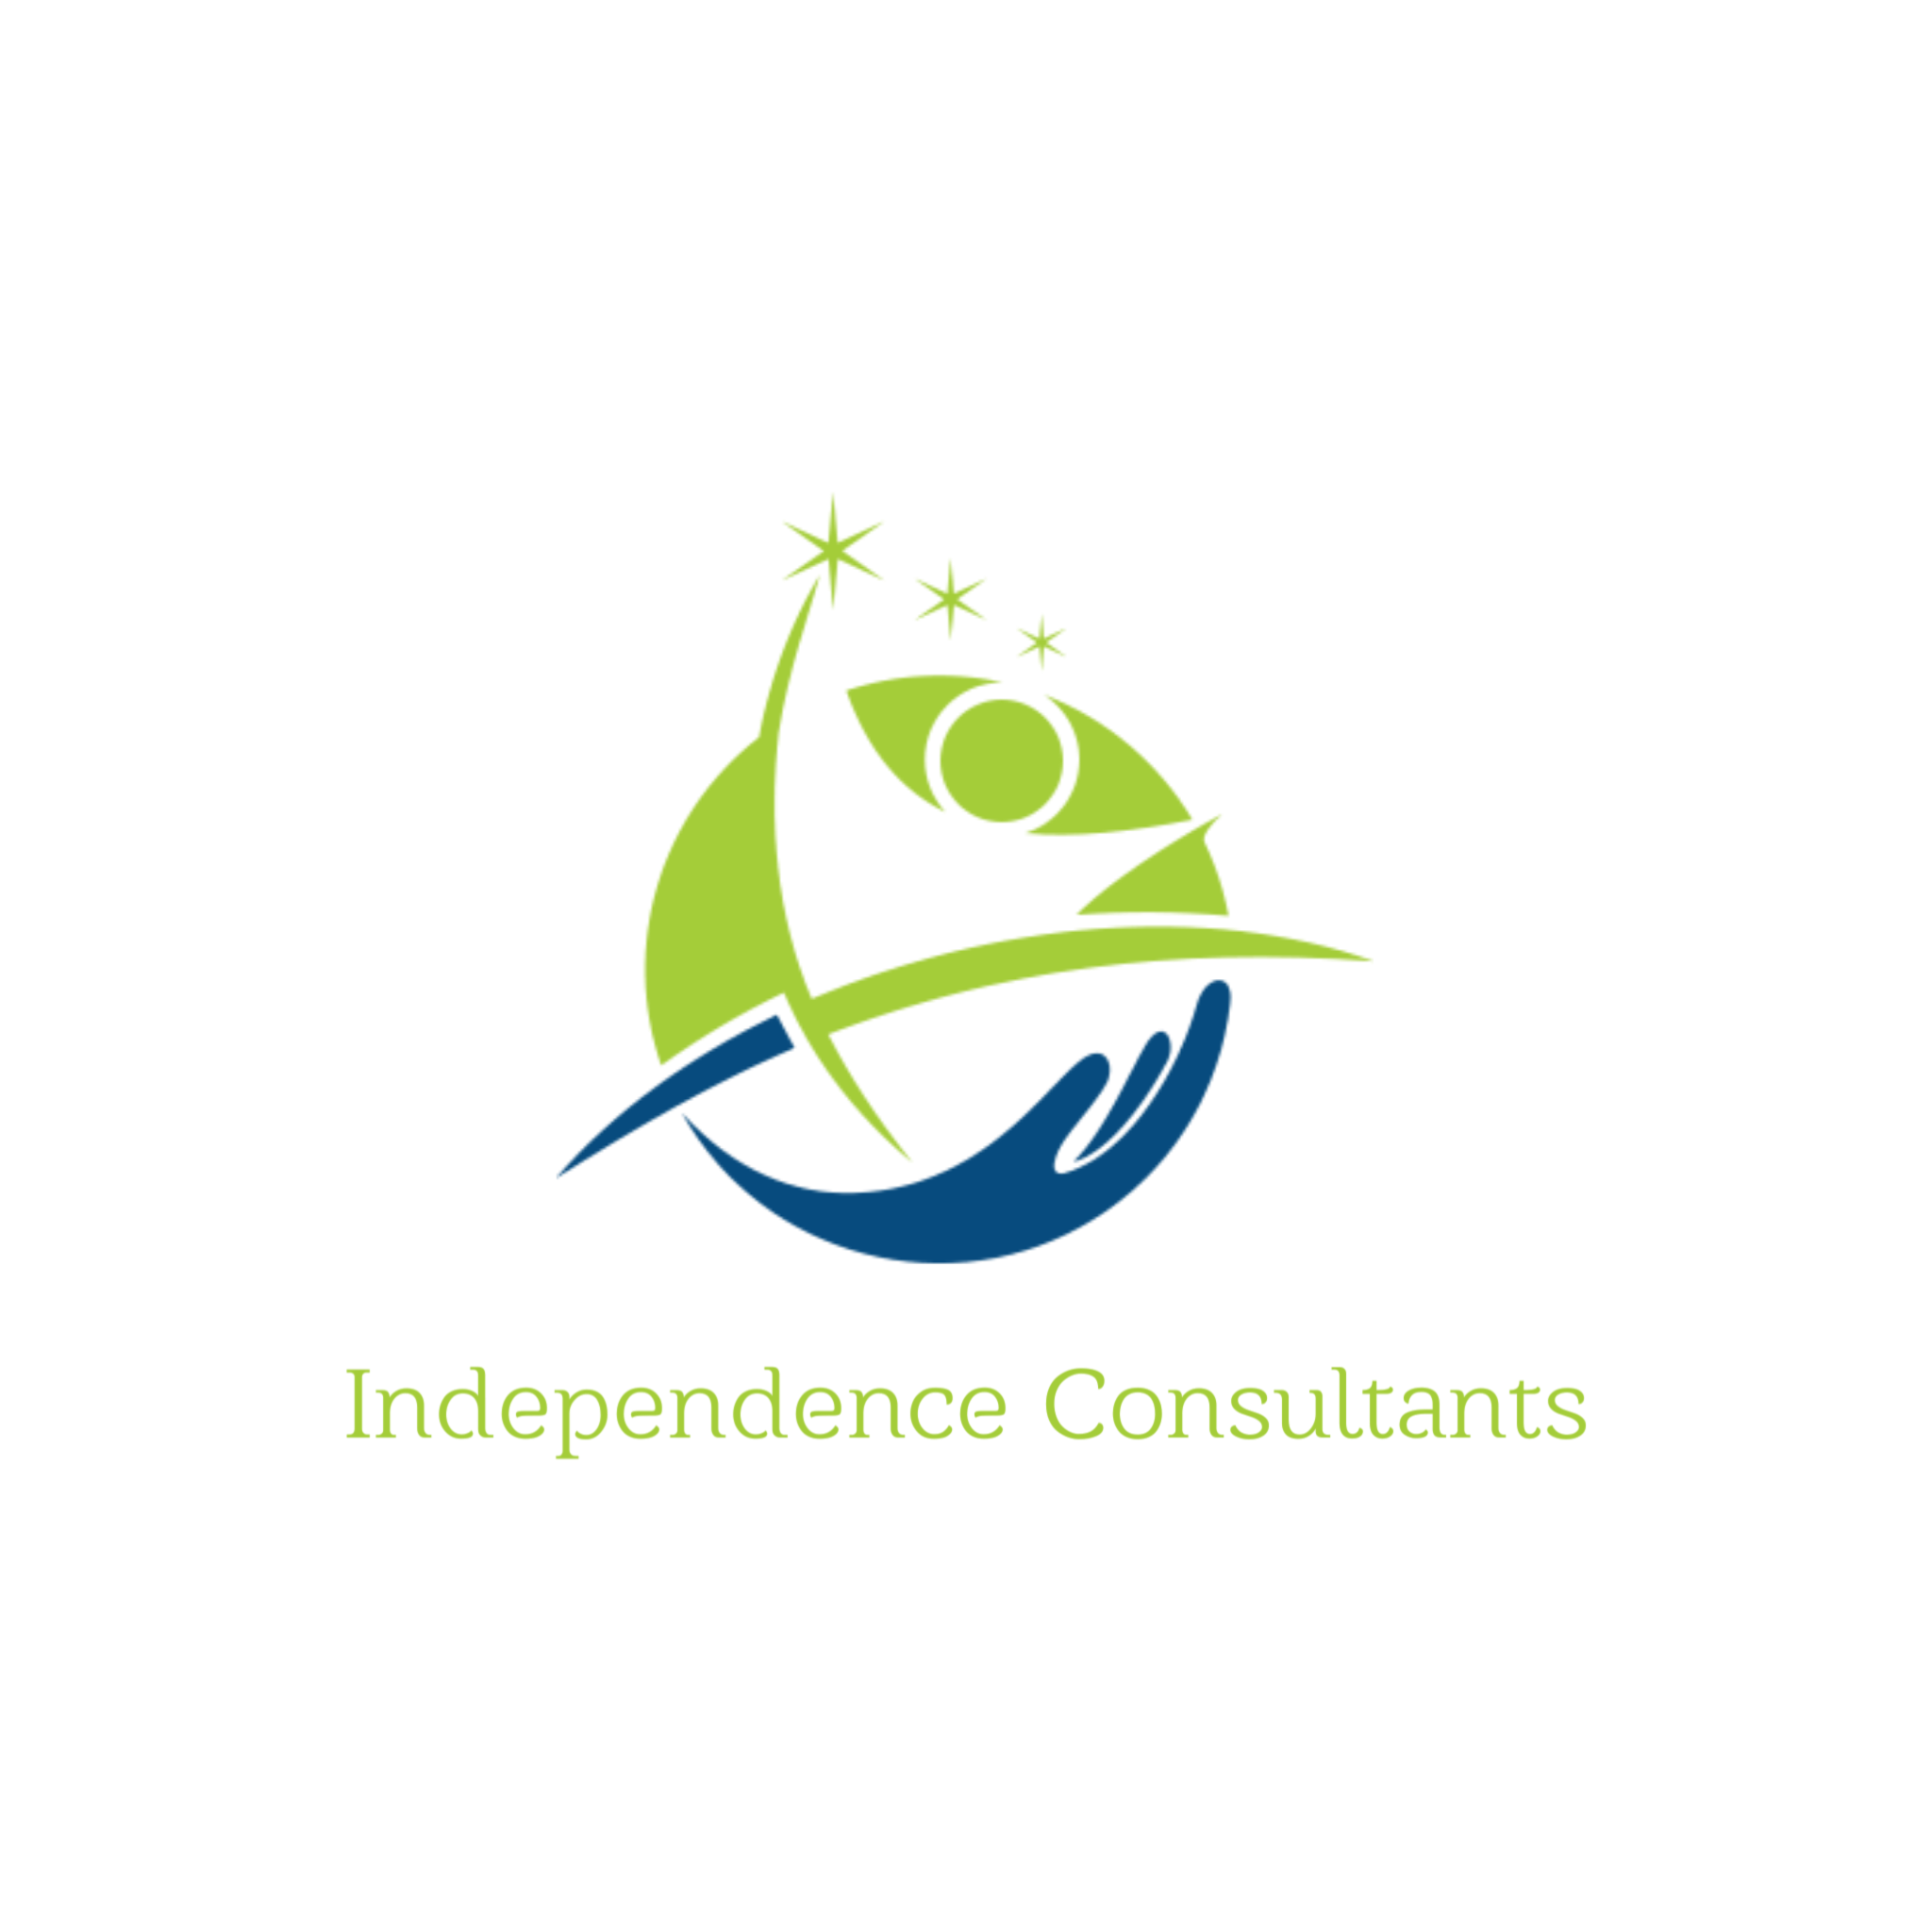 Independence Consultants - OT services in the South East